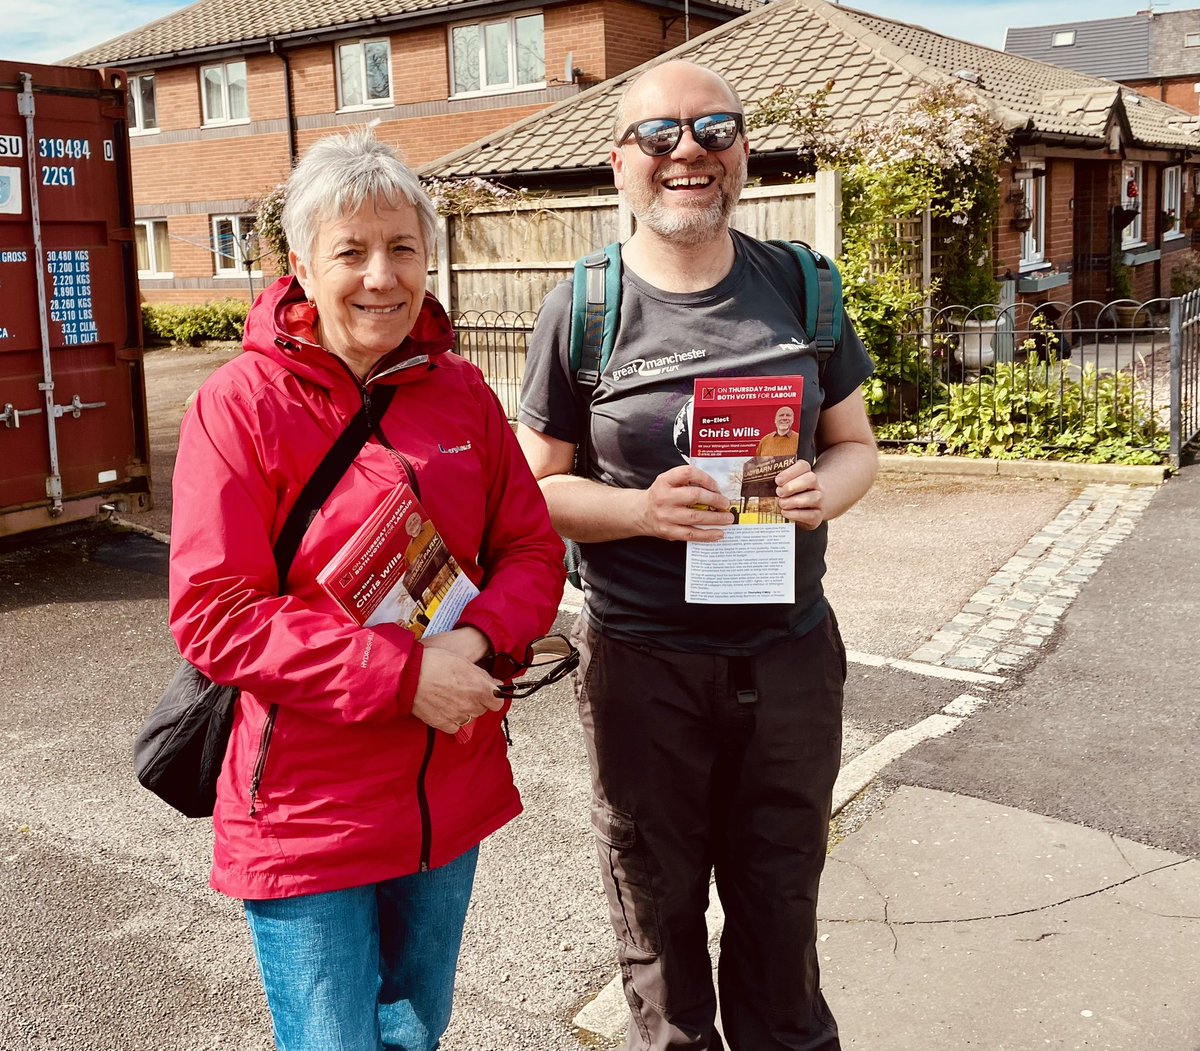 Been out delivering leaflets and postal vote letters in #Withington ward today - big thanks to the Charlestown team for their help! Make sure you complete and return your postal vote ballot, and use both your votes to #VoteLabour for me and @AndyBurnhamGM 📮🌹🌹